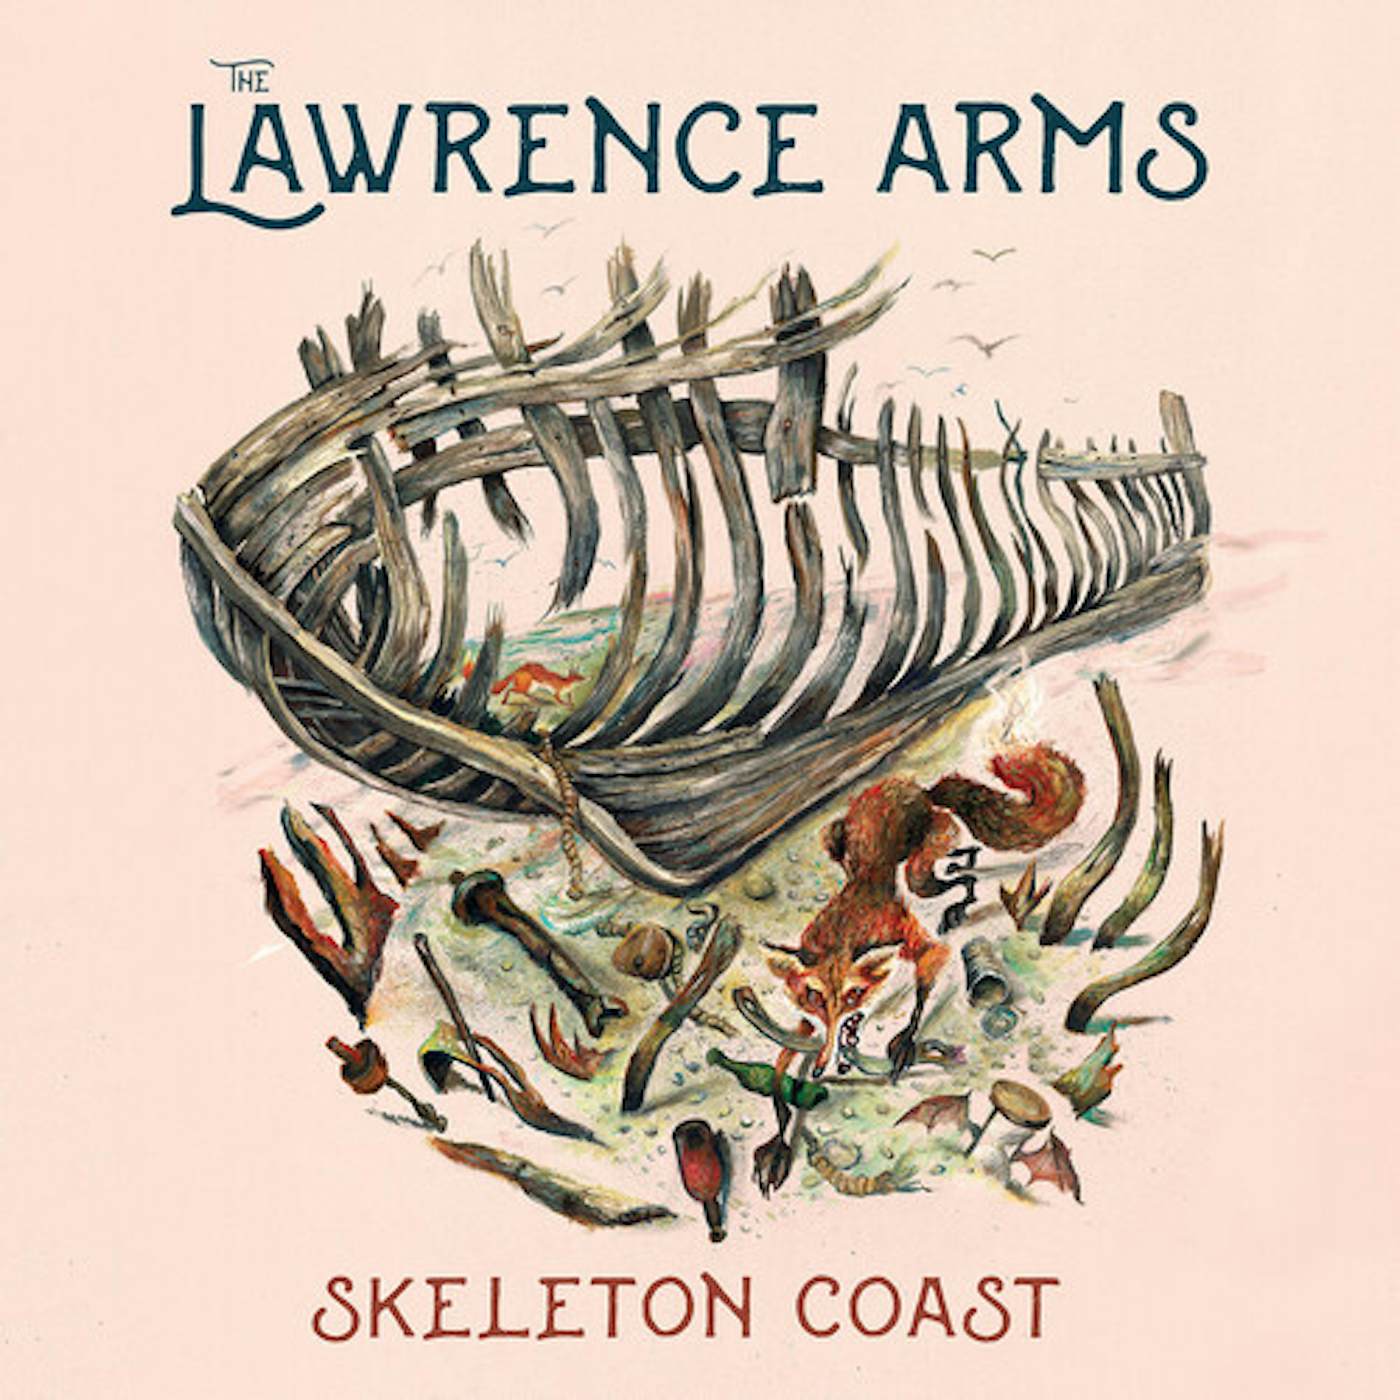 The Lawrence Arms Skeleton Coast Vinyl Record